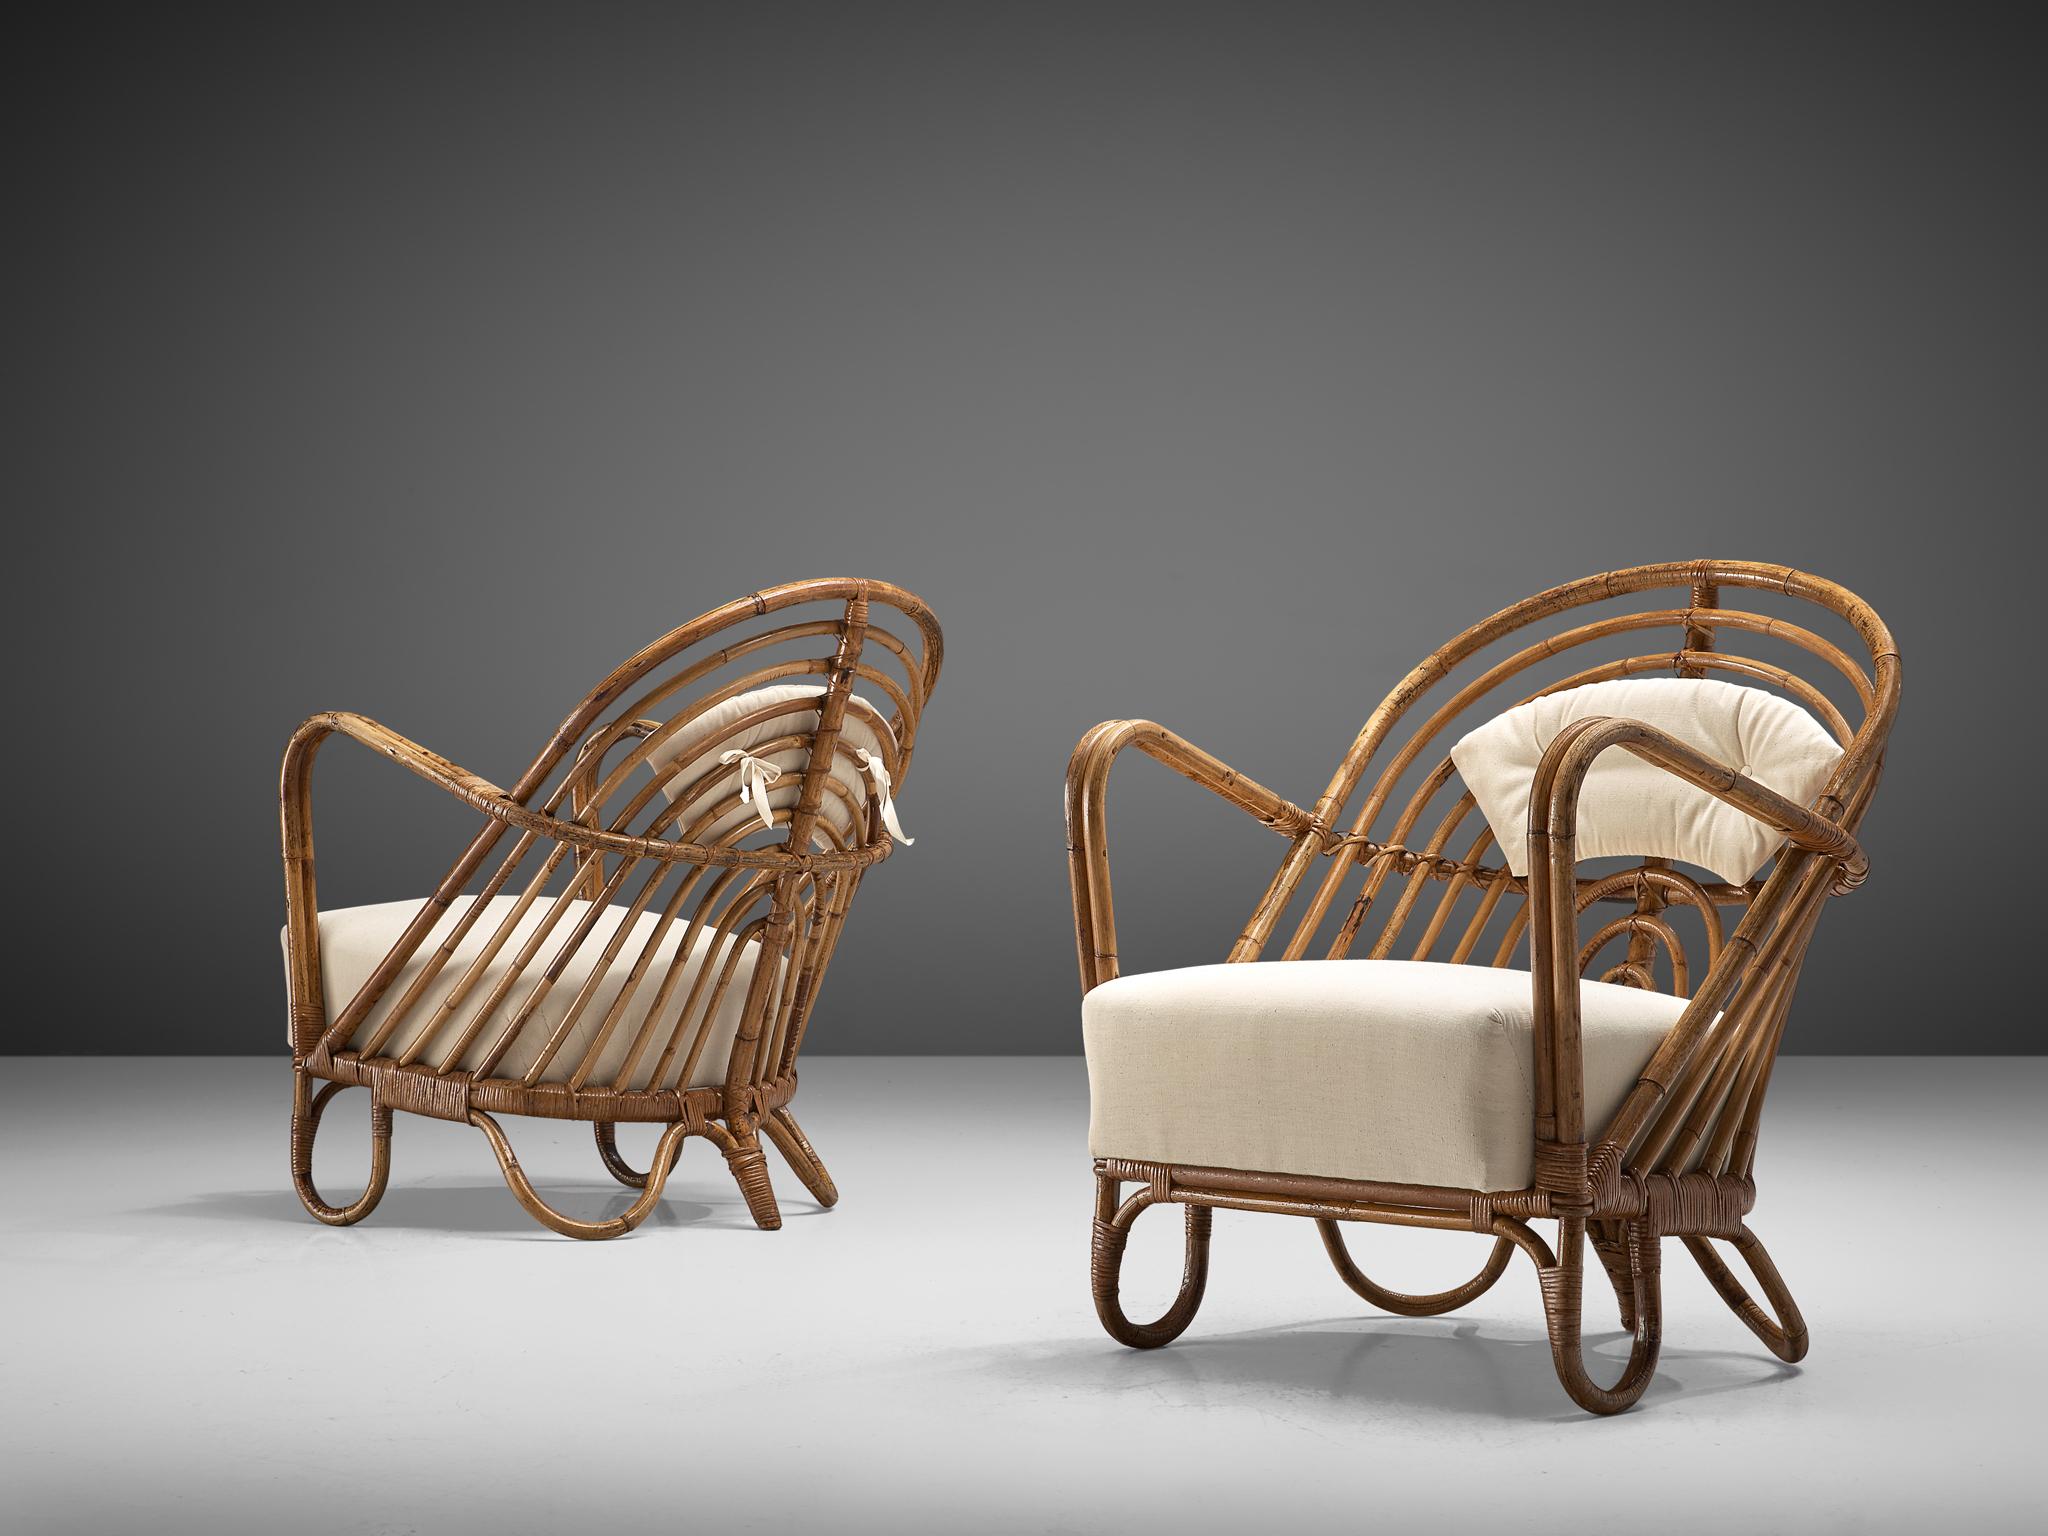 Pair of wicker lounge chairs, rattan and fabric, Denmark, 1940s.

Pair of lounge chairs featuring rounded and airy structure executed in rattan. The seat is slightly curved and features a thick cushion to comfortably sit on. The backrest is